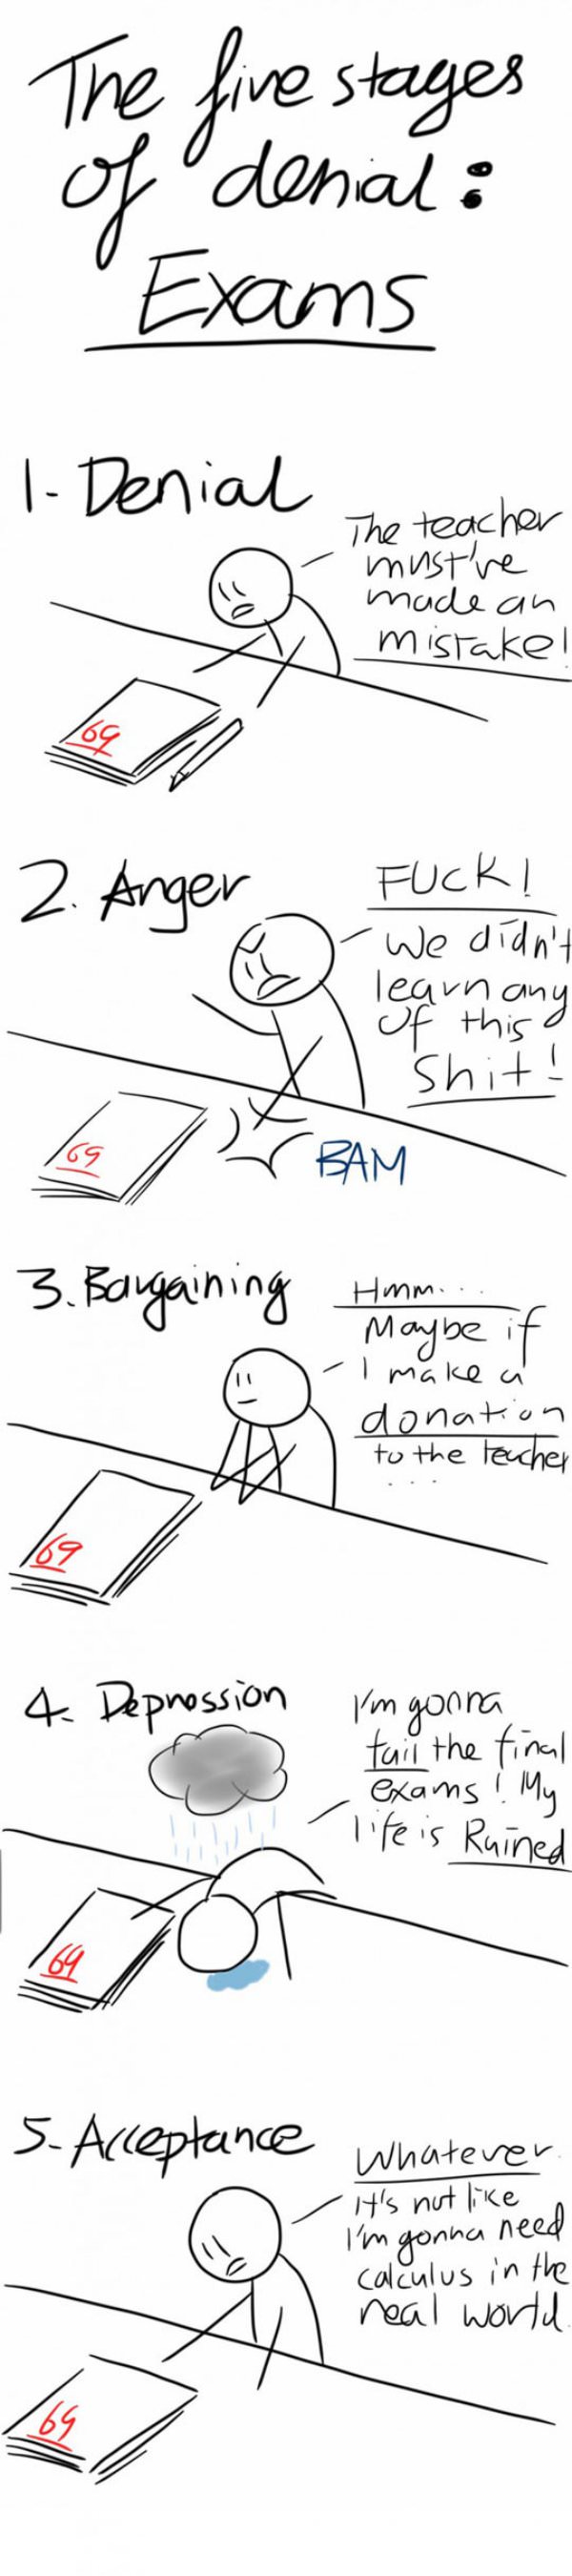 5 Stages of Exams funny picture